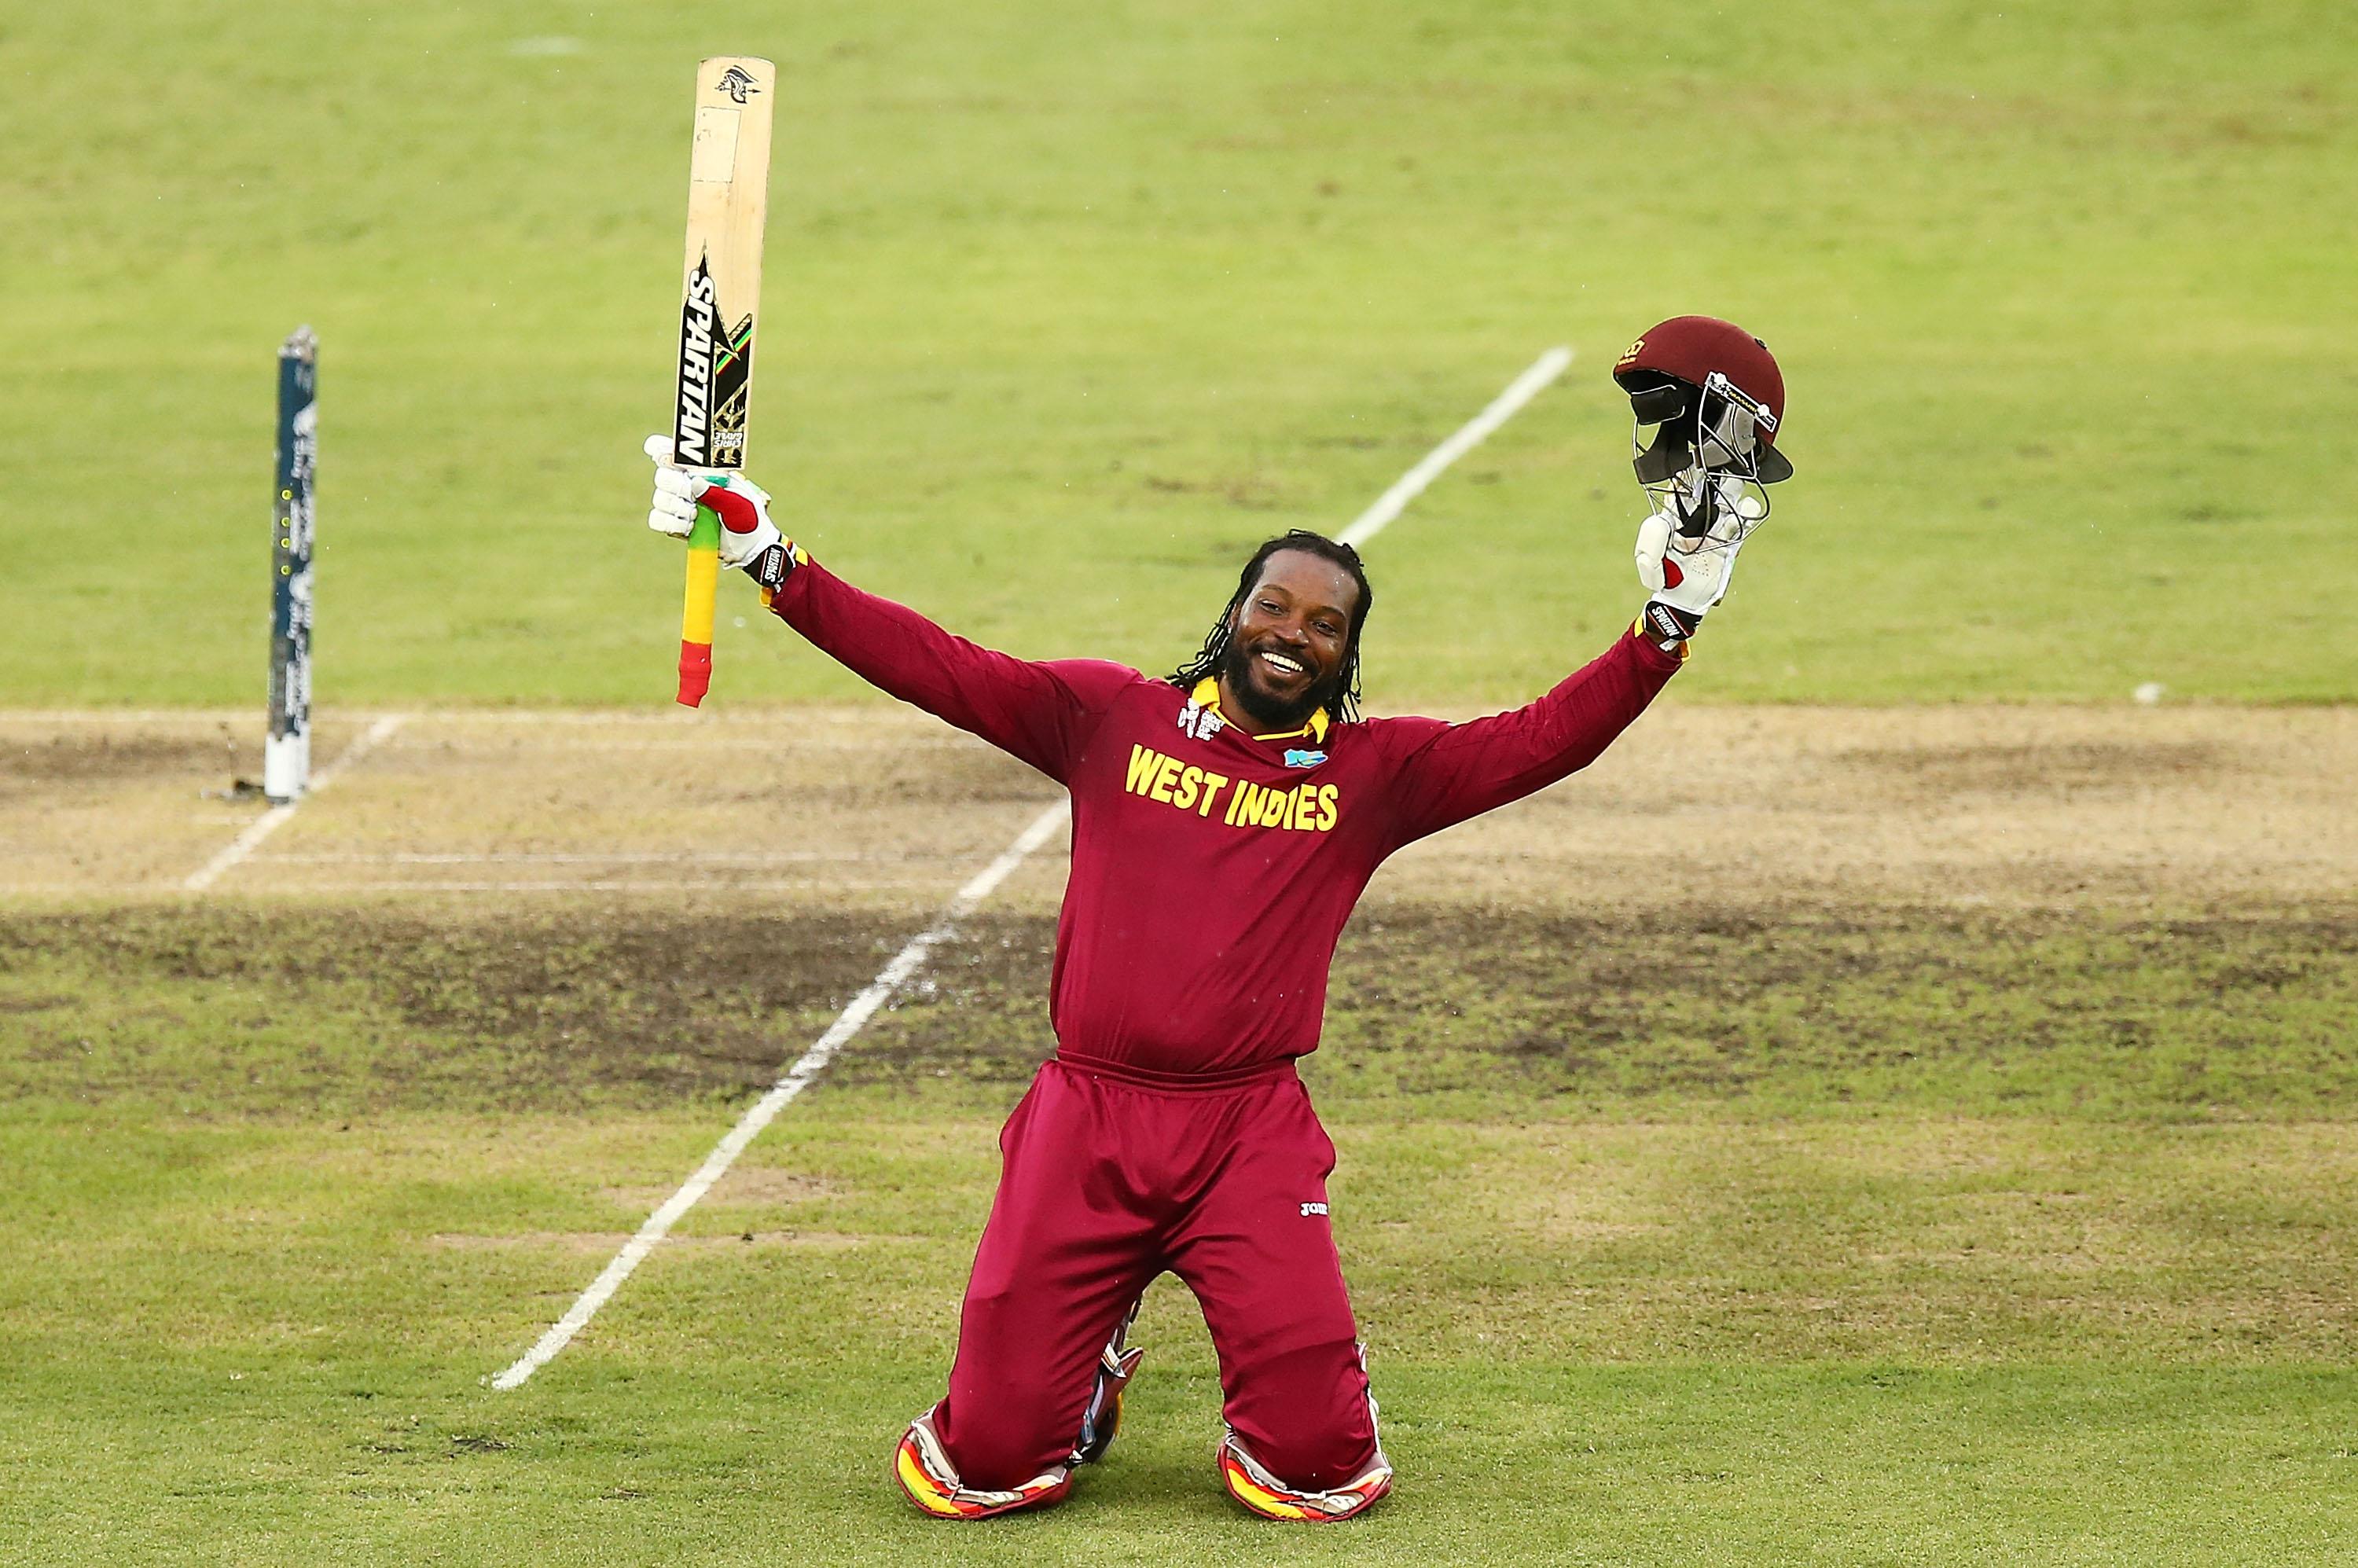 If fit, Gayle ‘is definitely going to play the World Cup: Jason Holder